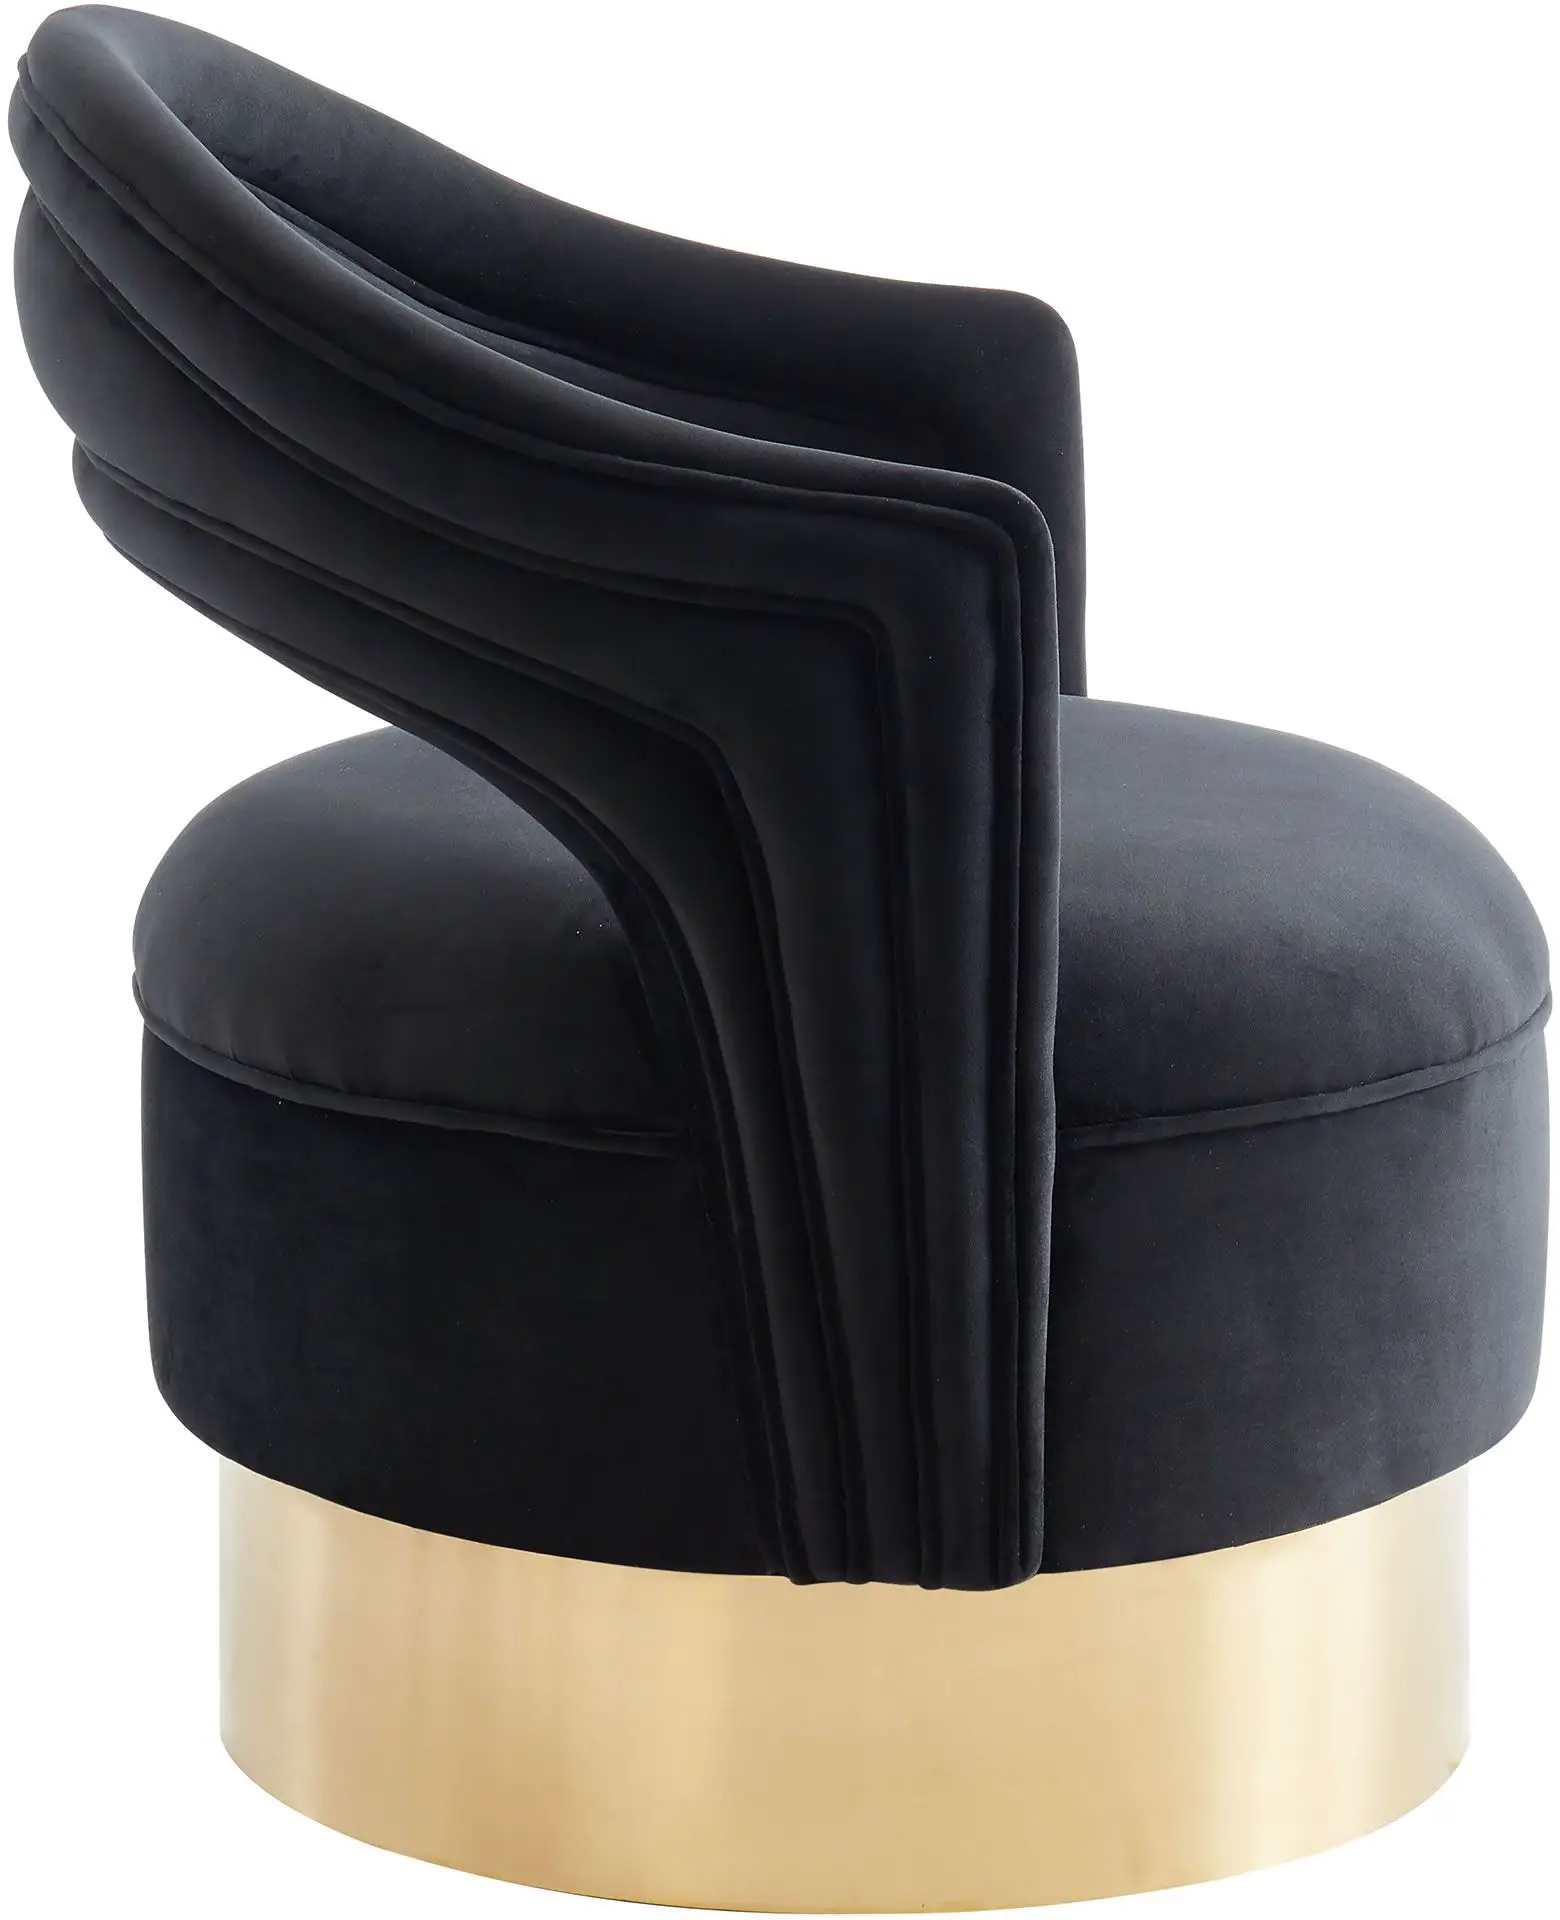 !nspire Sloane Accent Chair (Black and Gold)